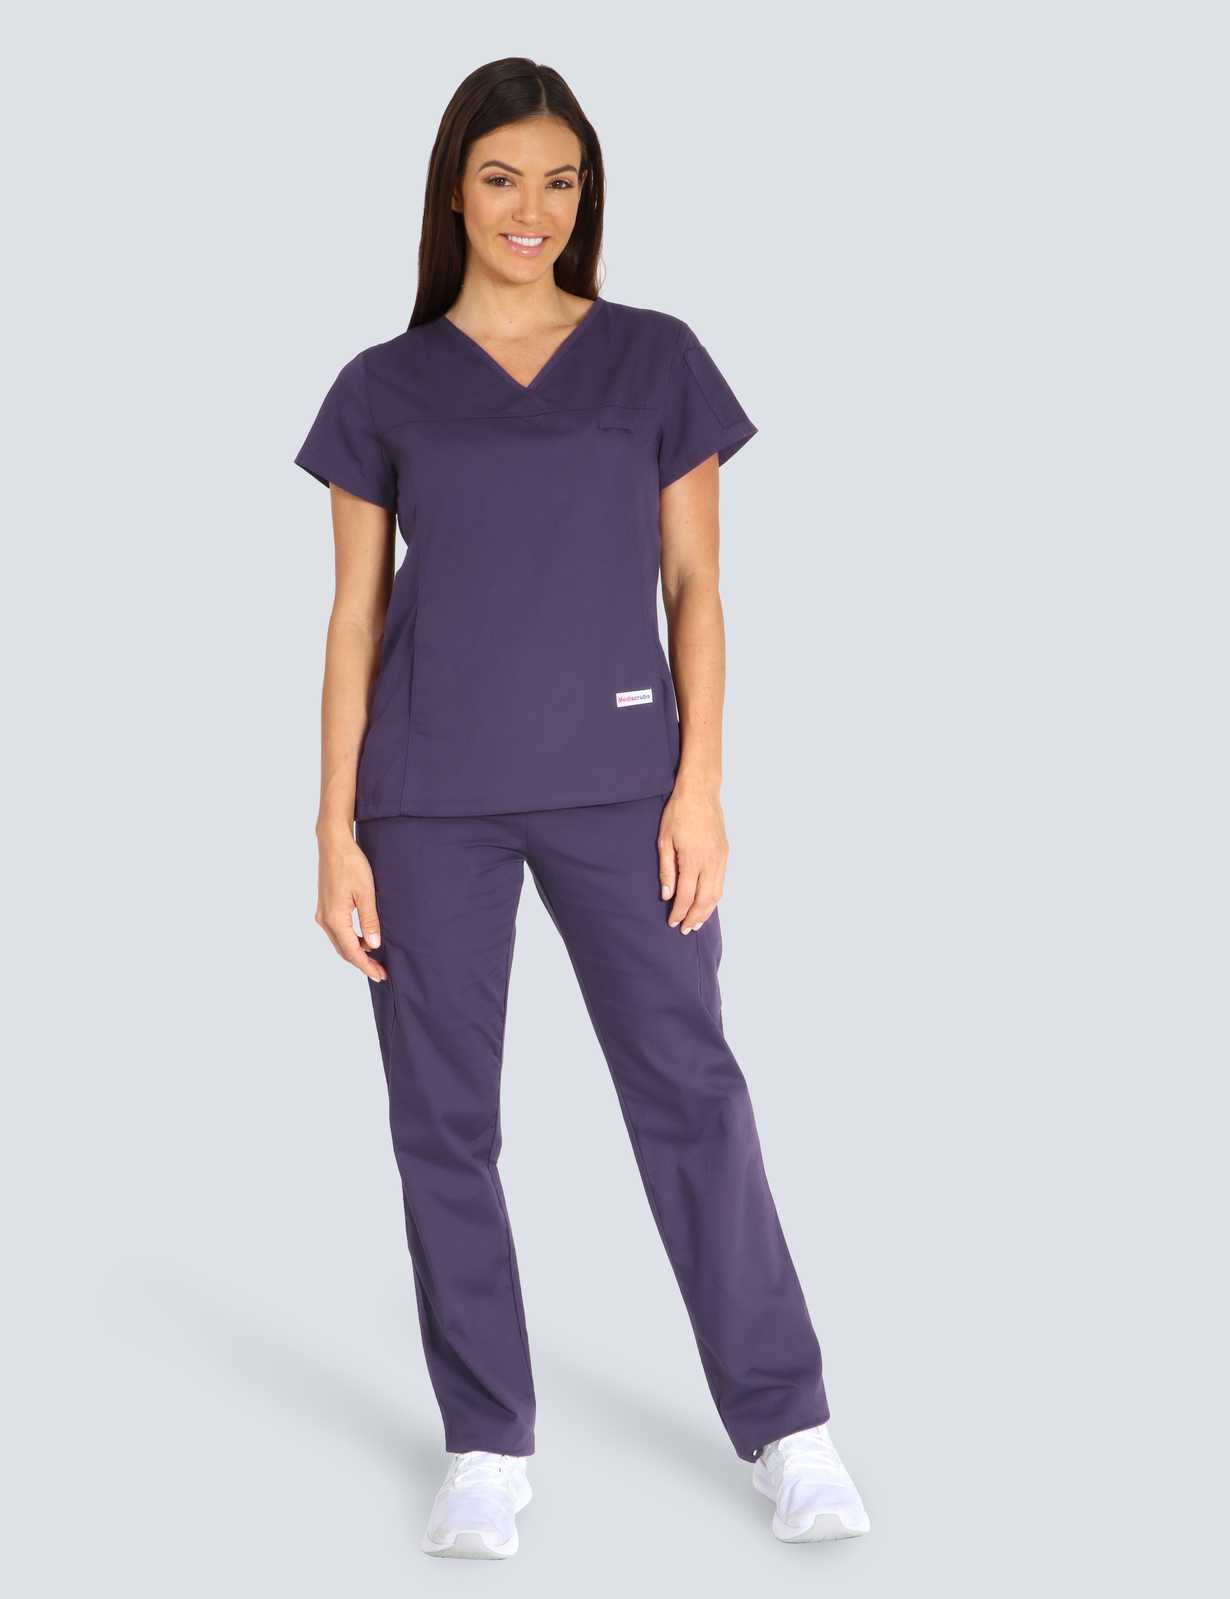 Peninsula Health - Dialysis UM (Women's Fit Solid Scrub Top and Cargo Pants in Aubergine incl Logos)